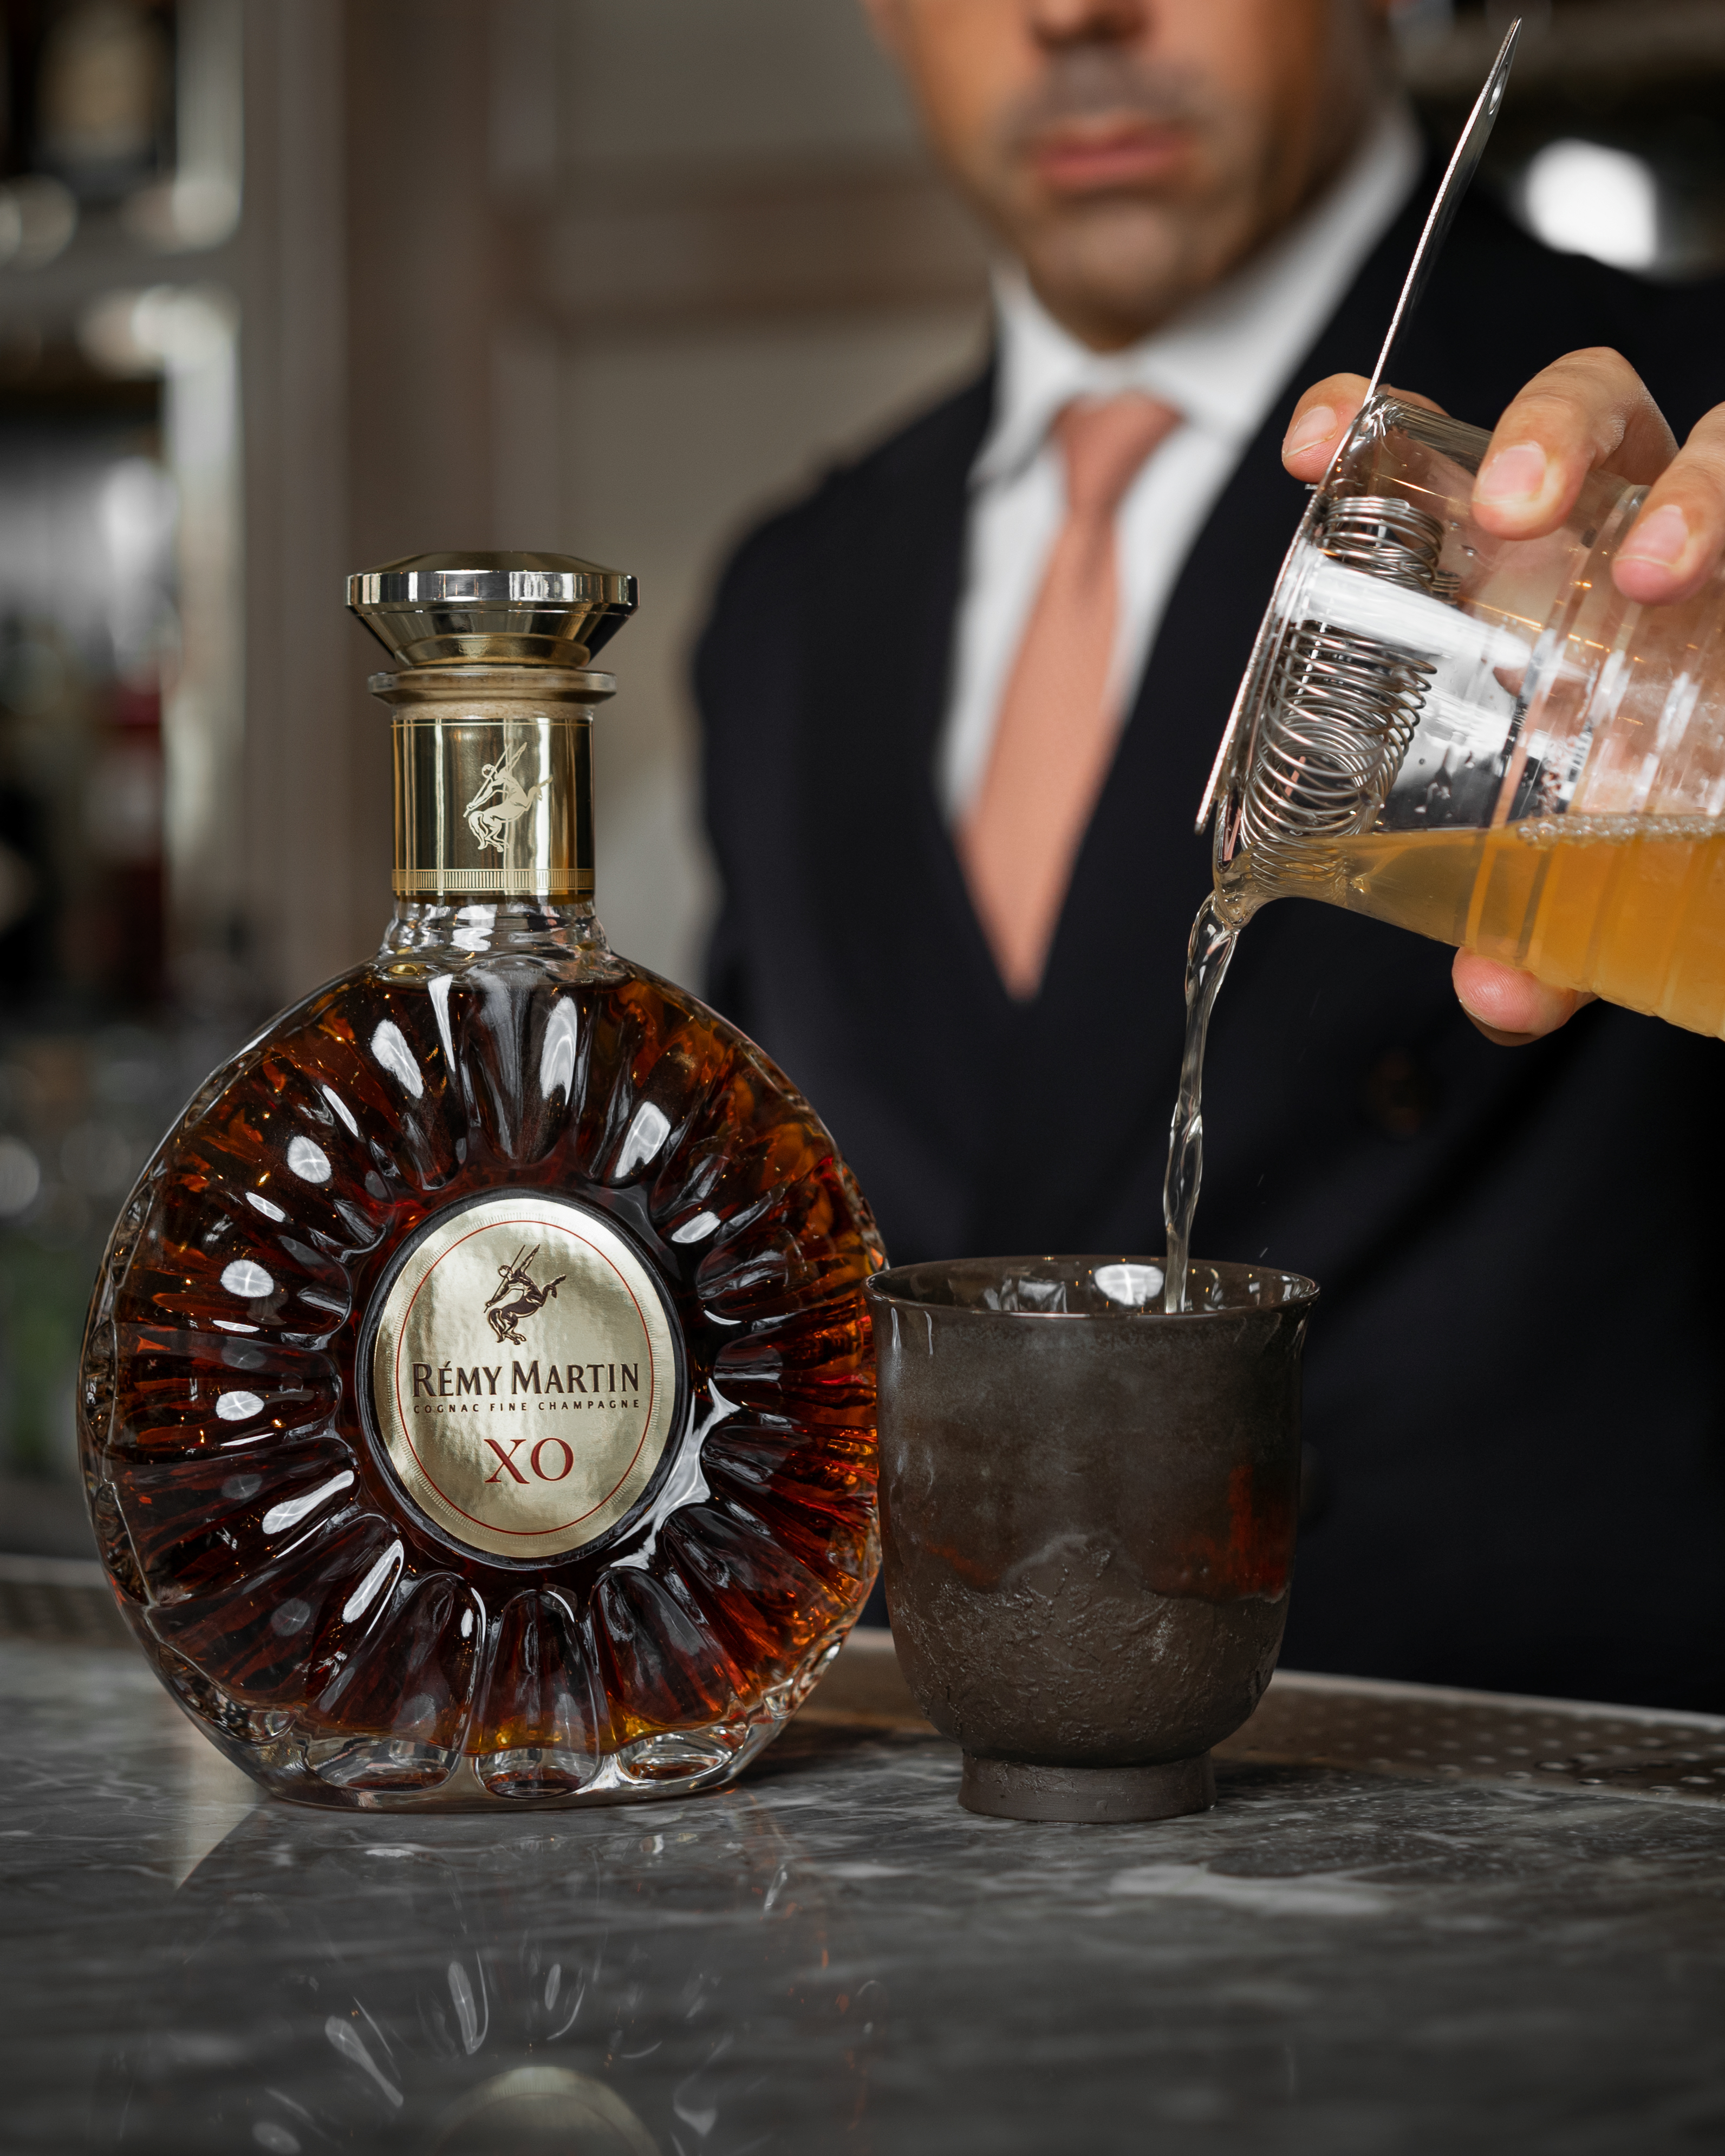 Rémy Martin teams up with The Connaught on a new cocktail